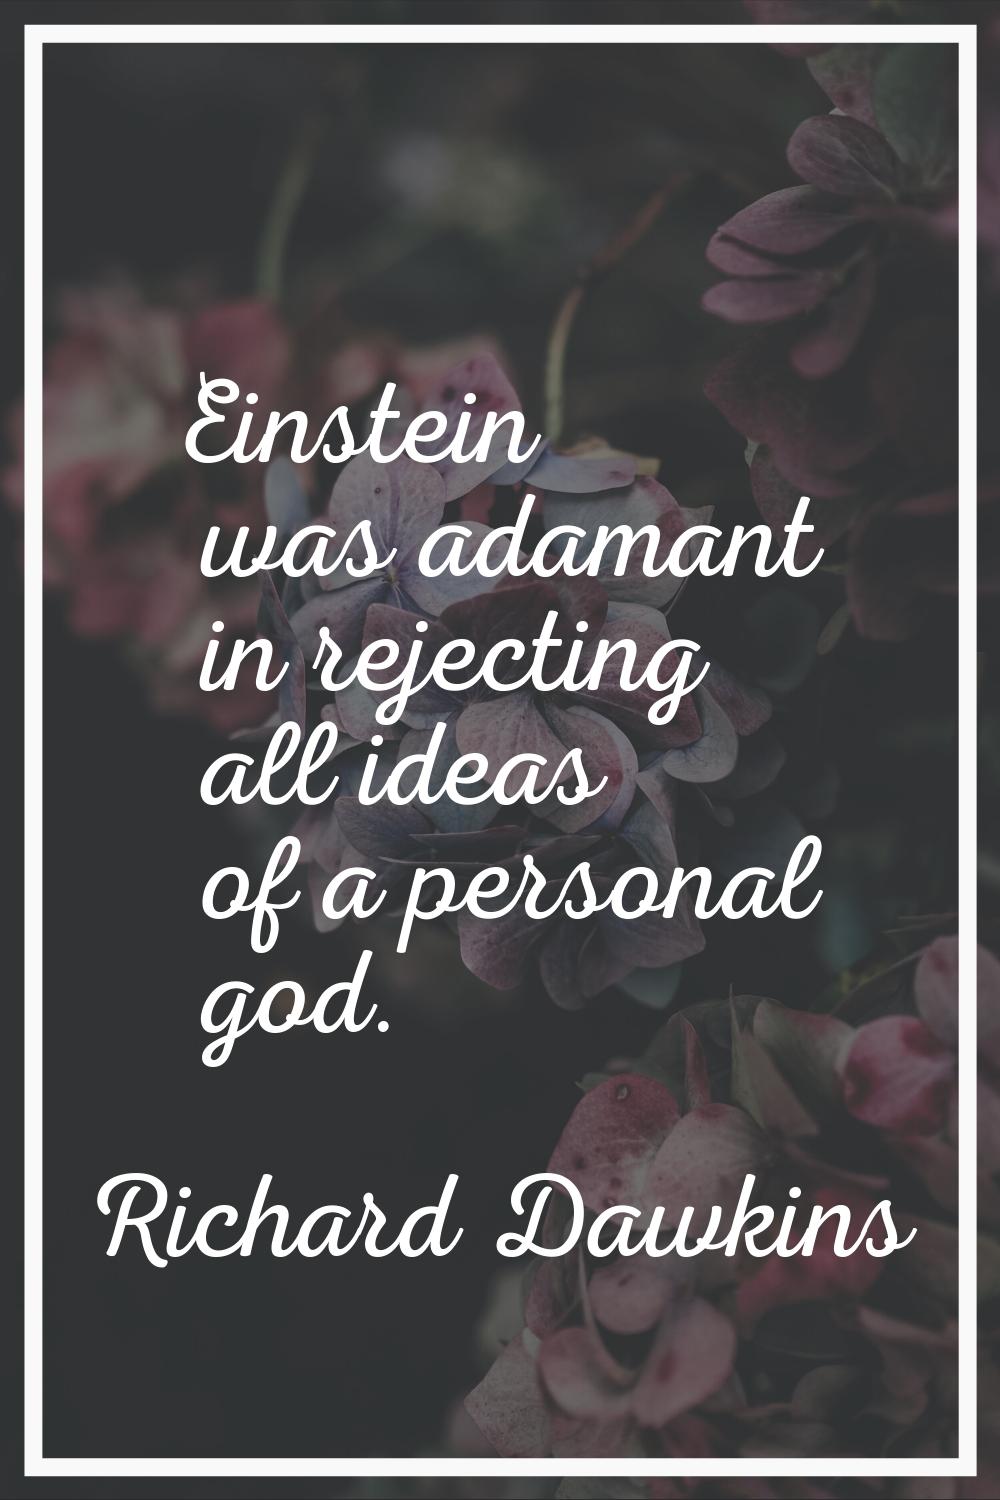 Einstein was adamant in rejecting all ideas of a personal god.